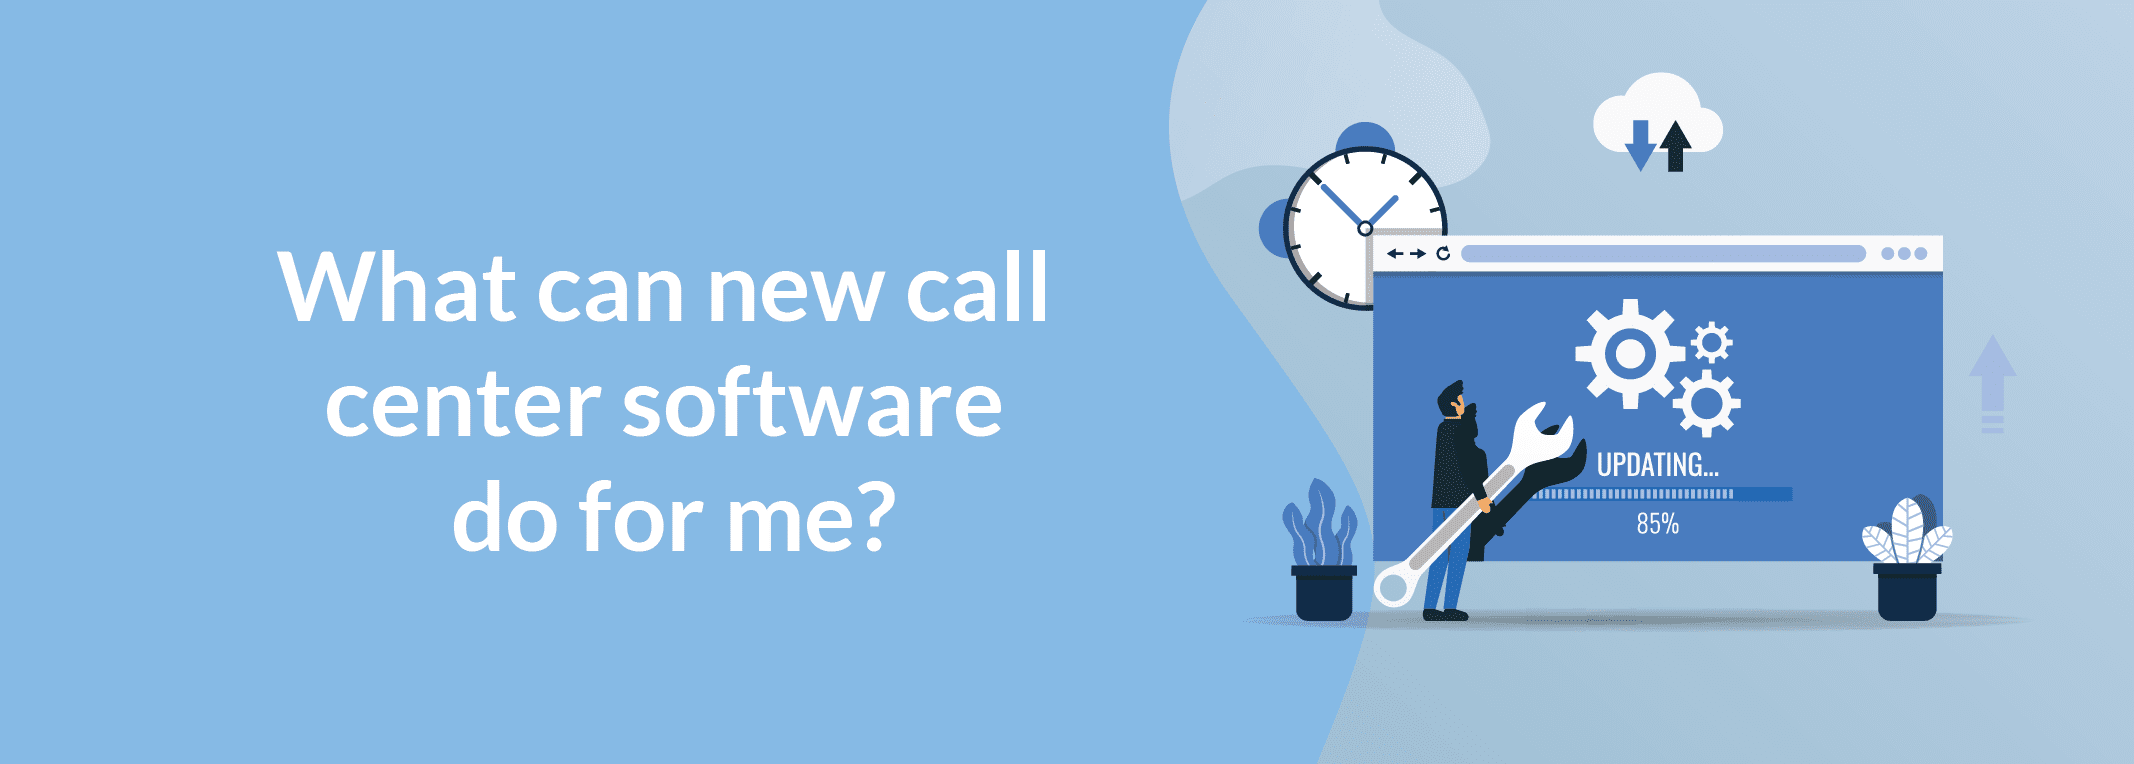 What Can New Call Center Software Do For You?